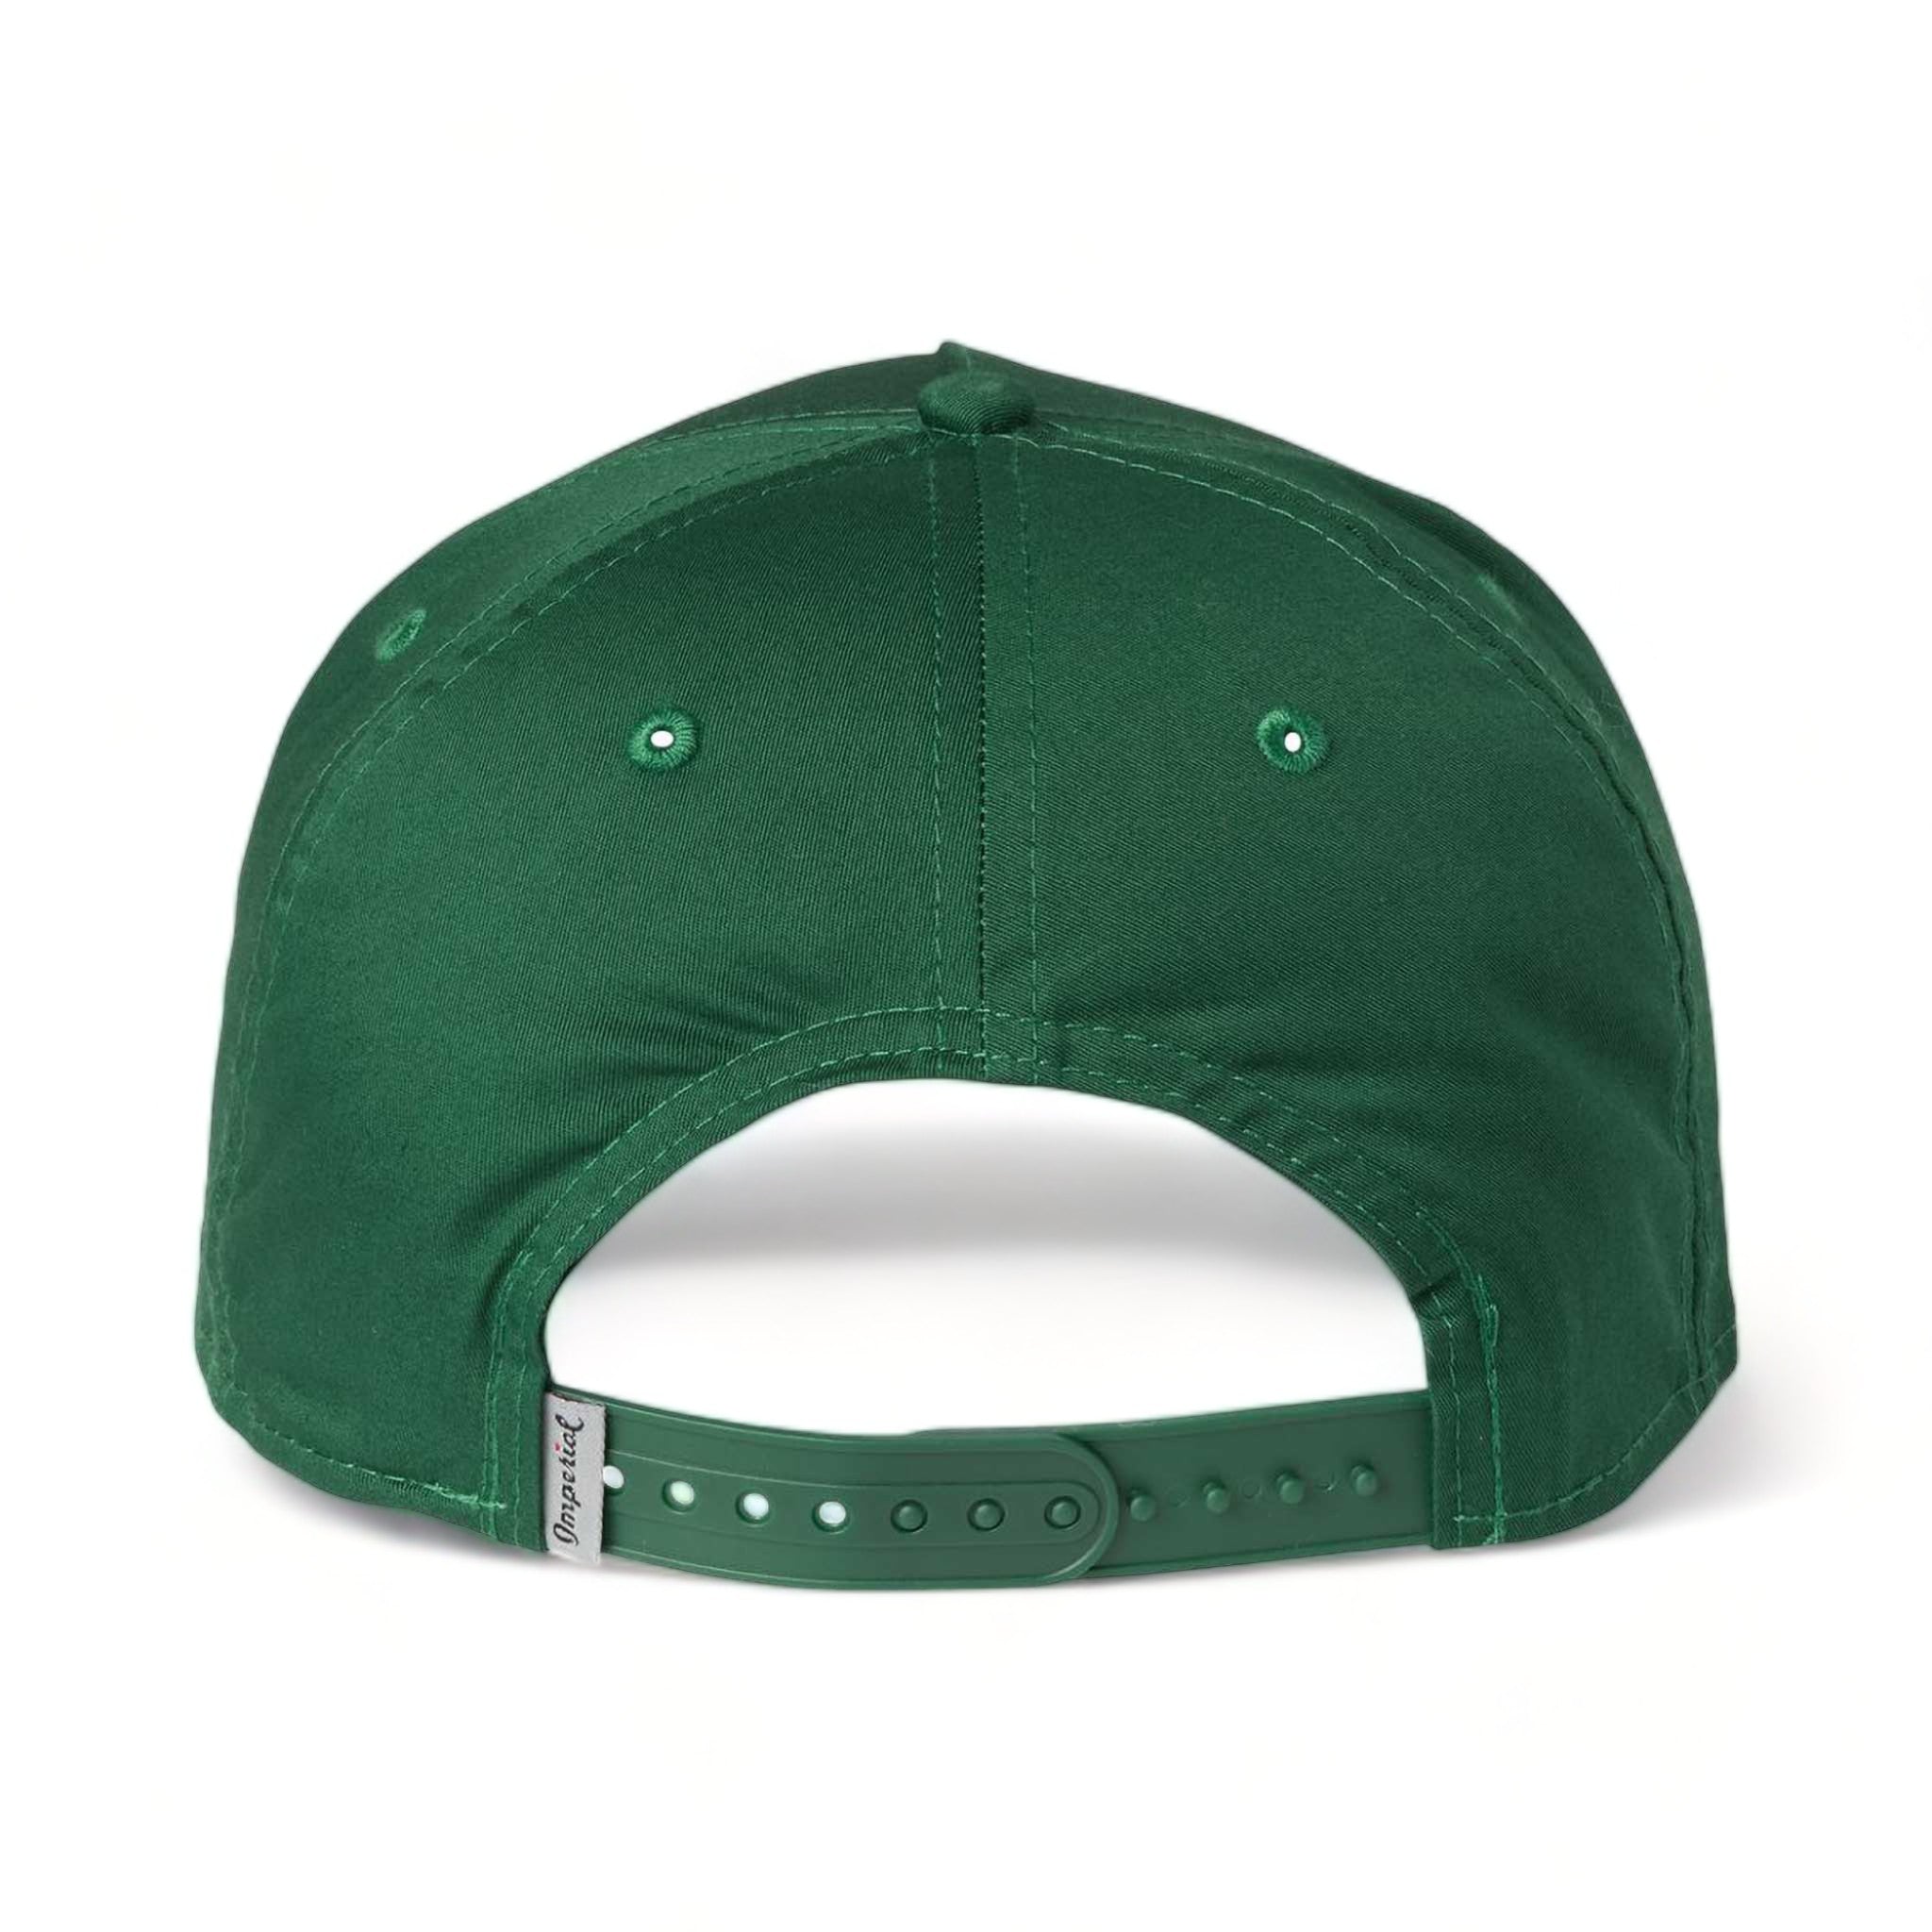 Back view of Imperial 5056 custom hat in forest and white